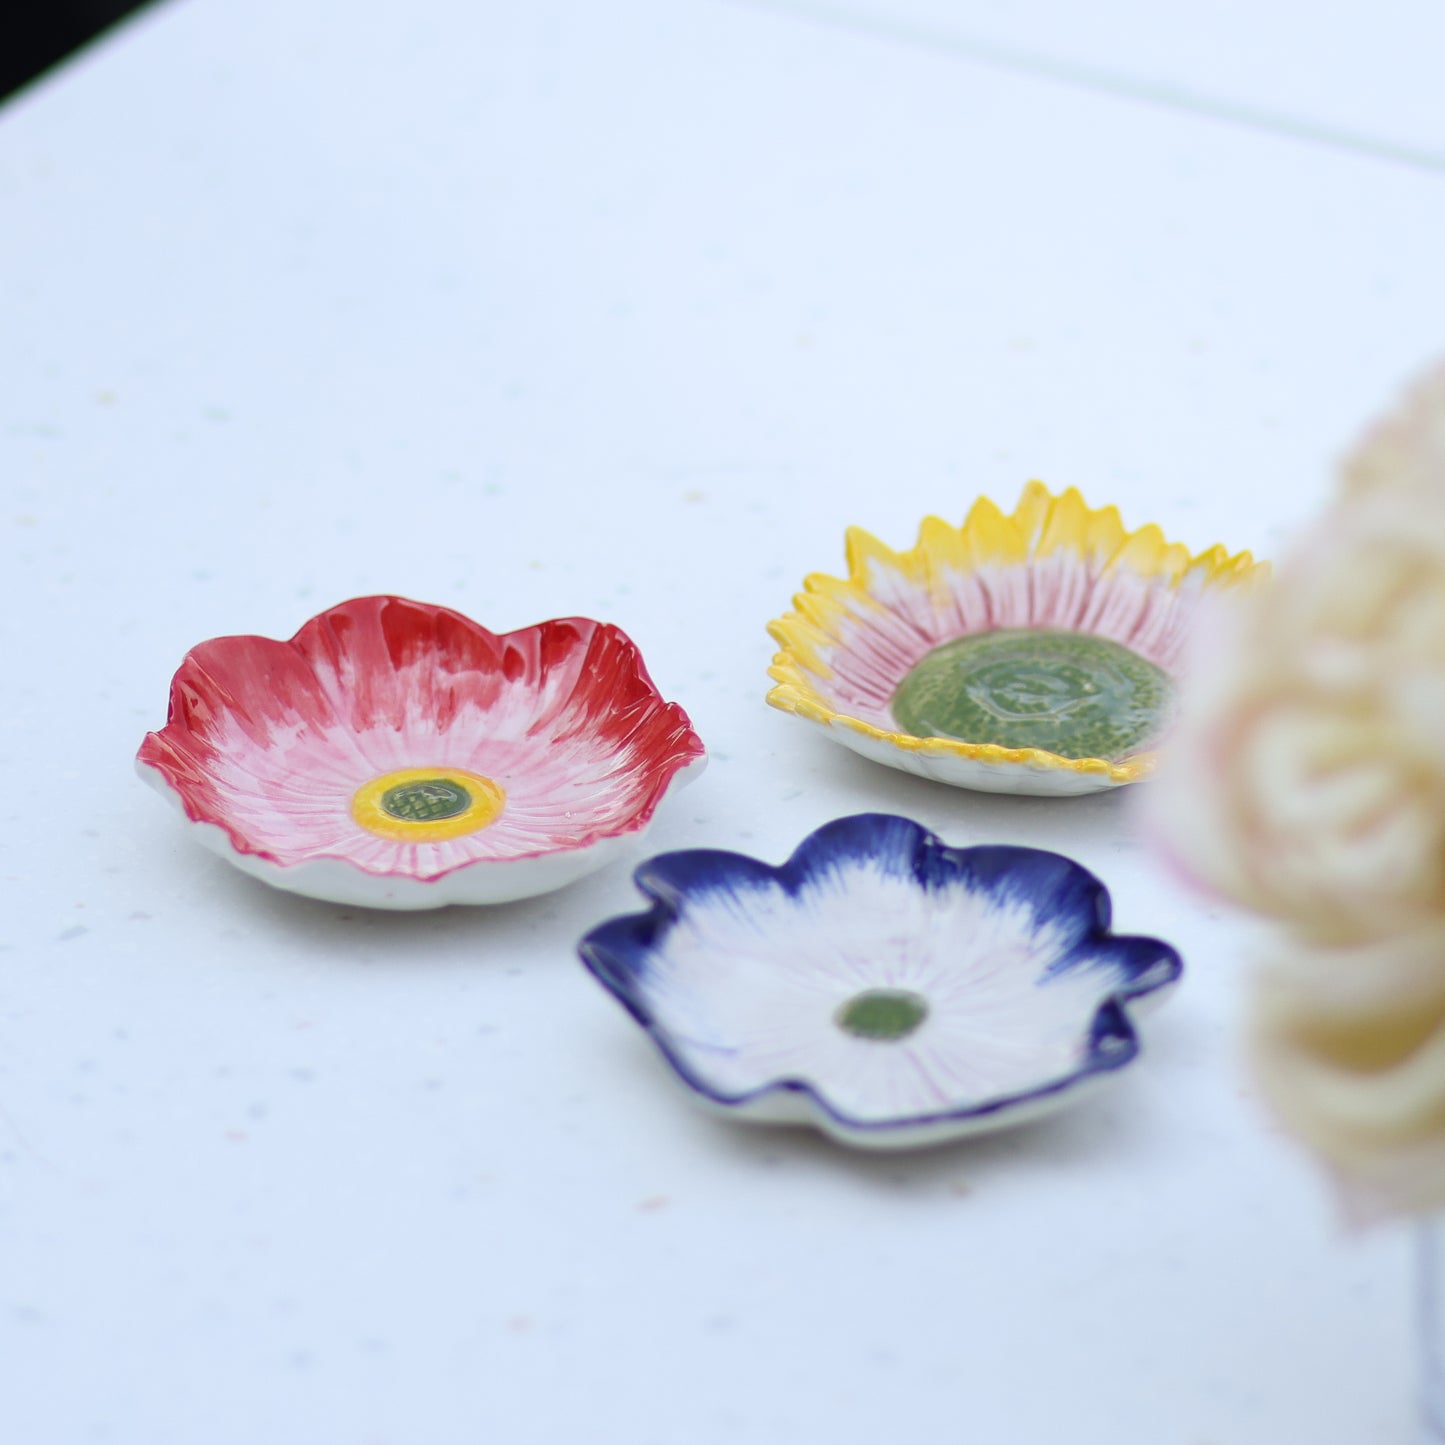 Set of 3 Hand-Painted Flower serving plates